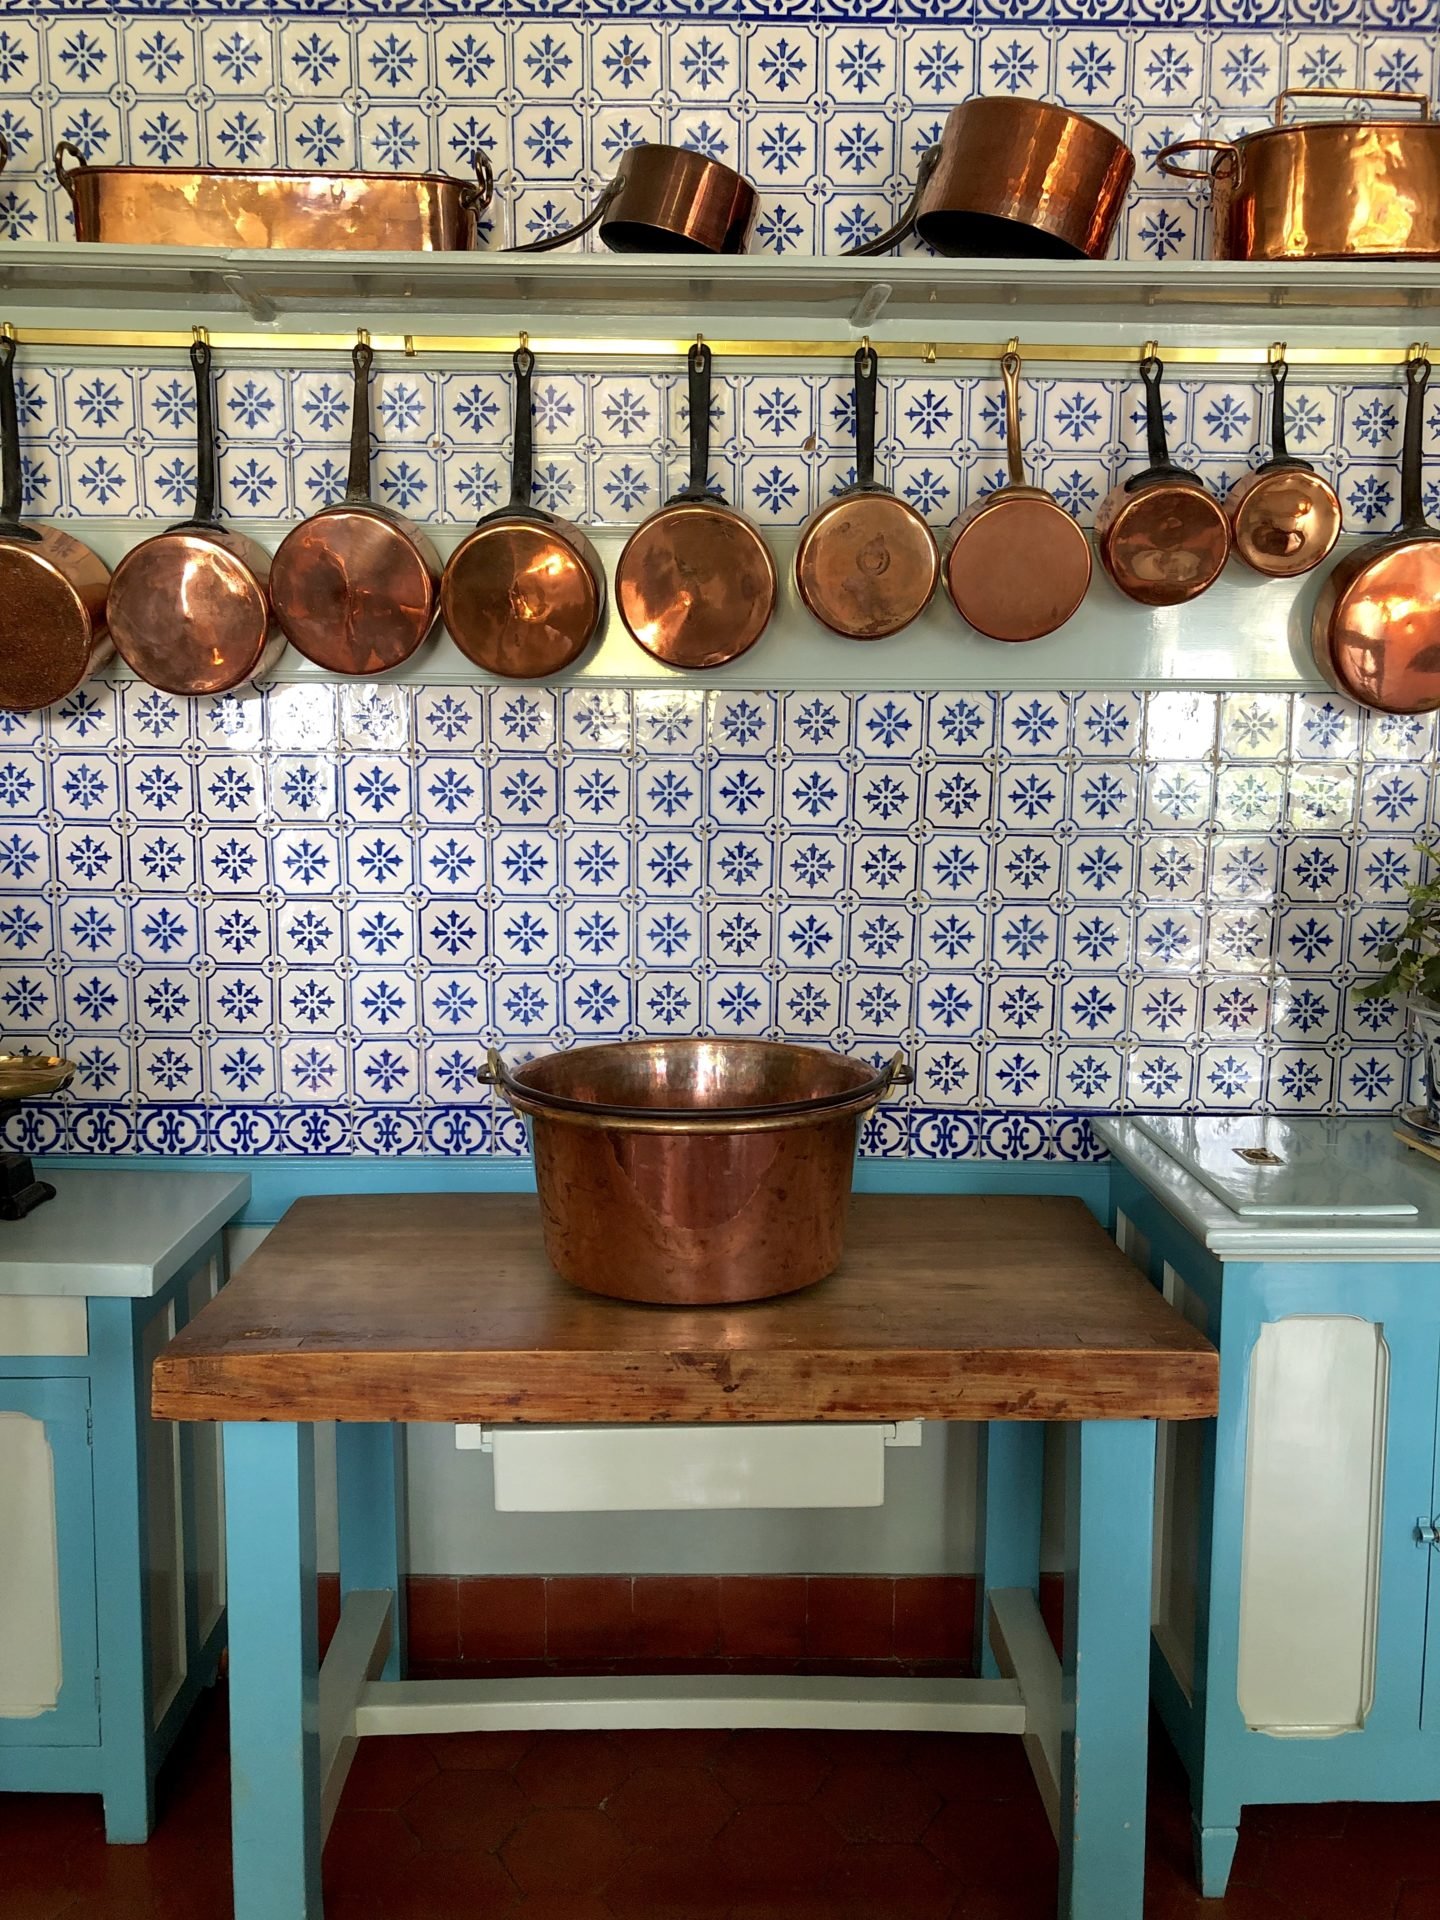 The tiles on Claude Monets kitchen walls are from Rouen and the copper pots contrast  with the blue and white tiles.